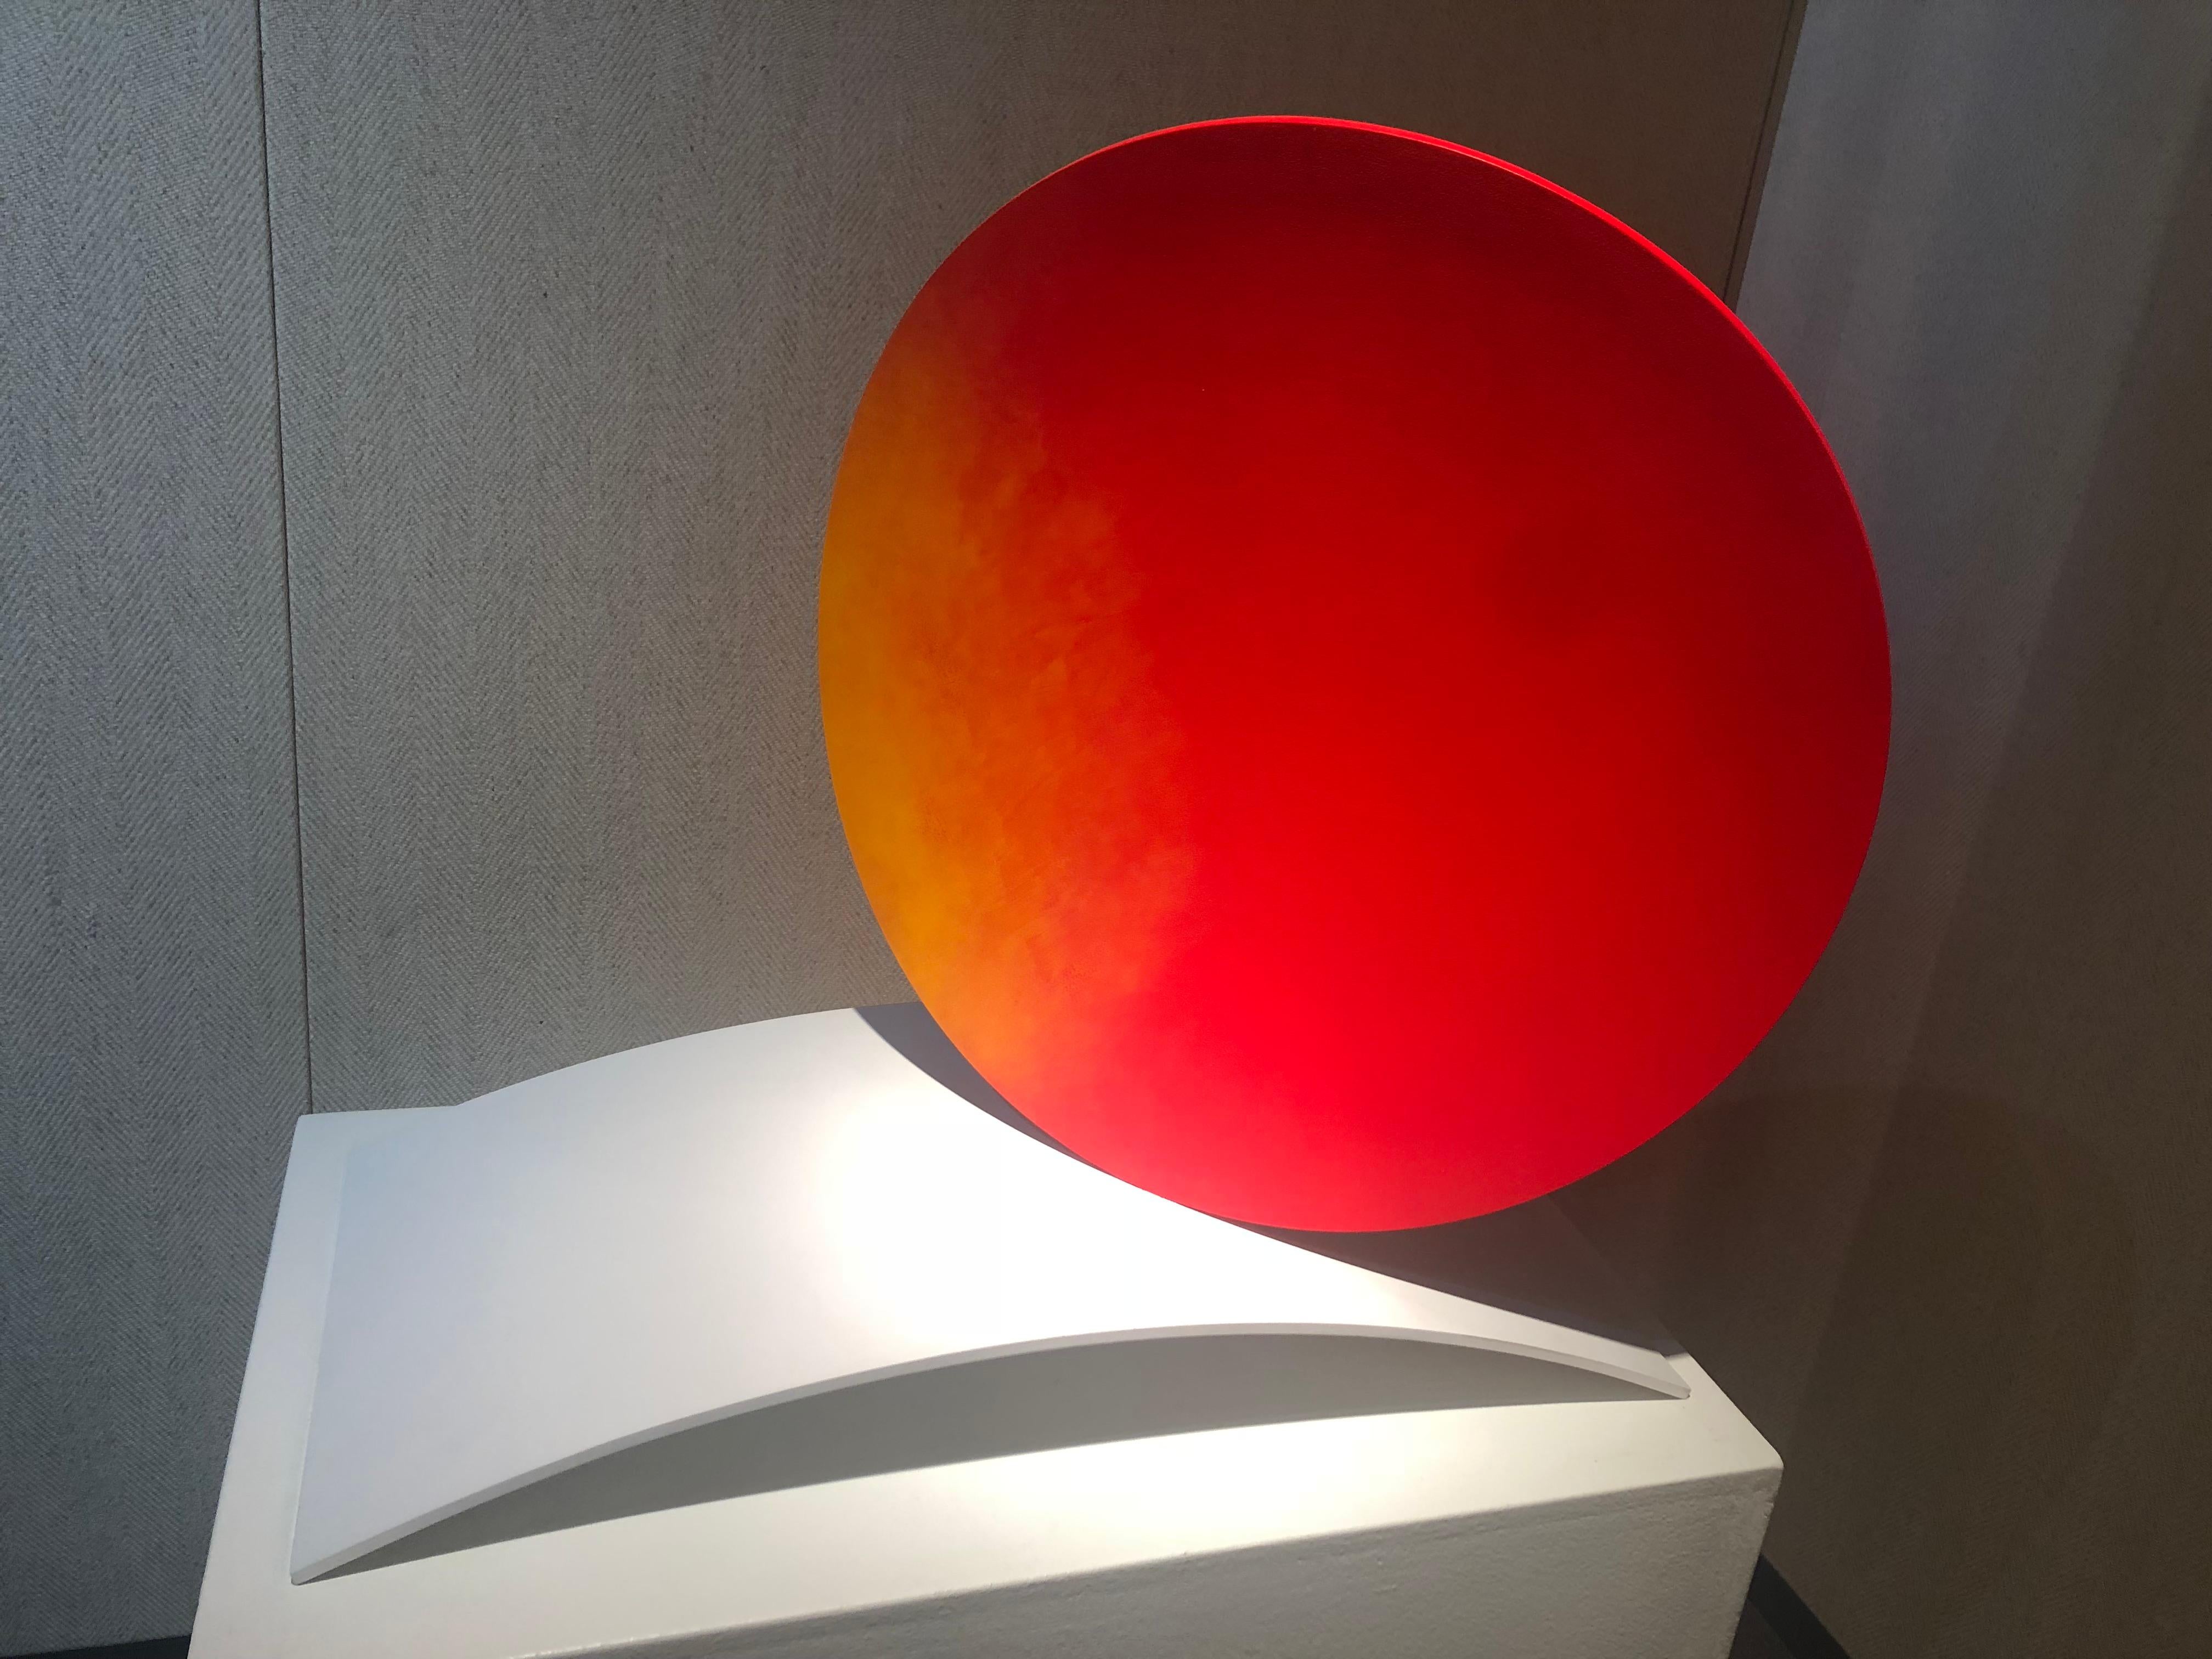 Solar flare is a sculpture that was created from welded aluminum with acrylic & enamel. 

Created by Lois Teicher, a professional sculptor for over thirty years, each of her pieces are manifested from her personal journey that has led her to search